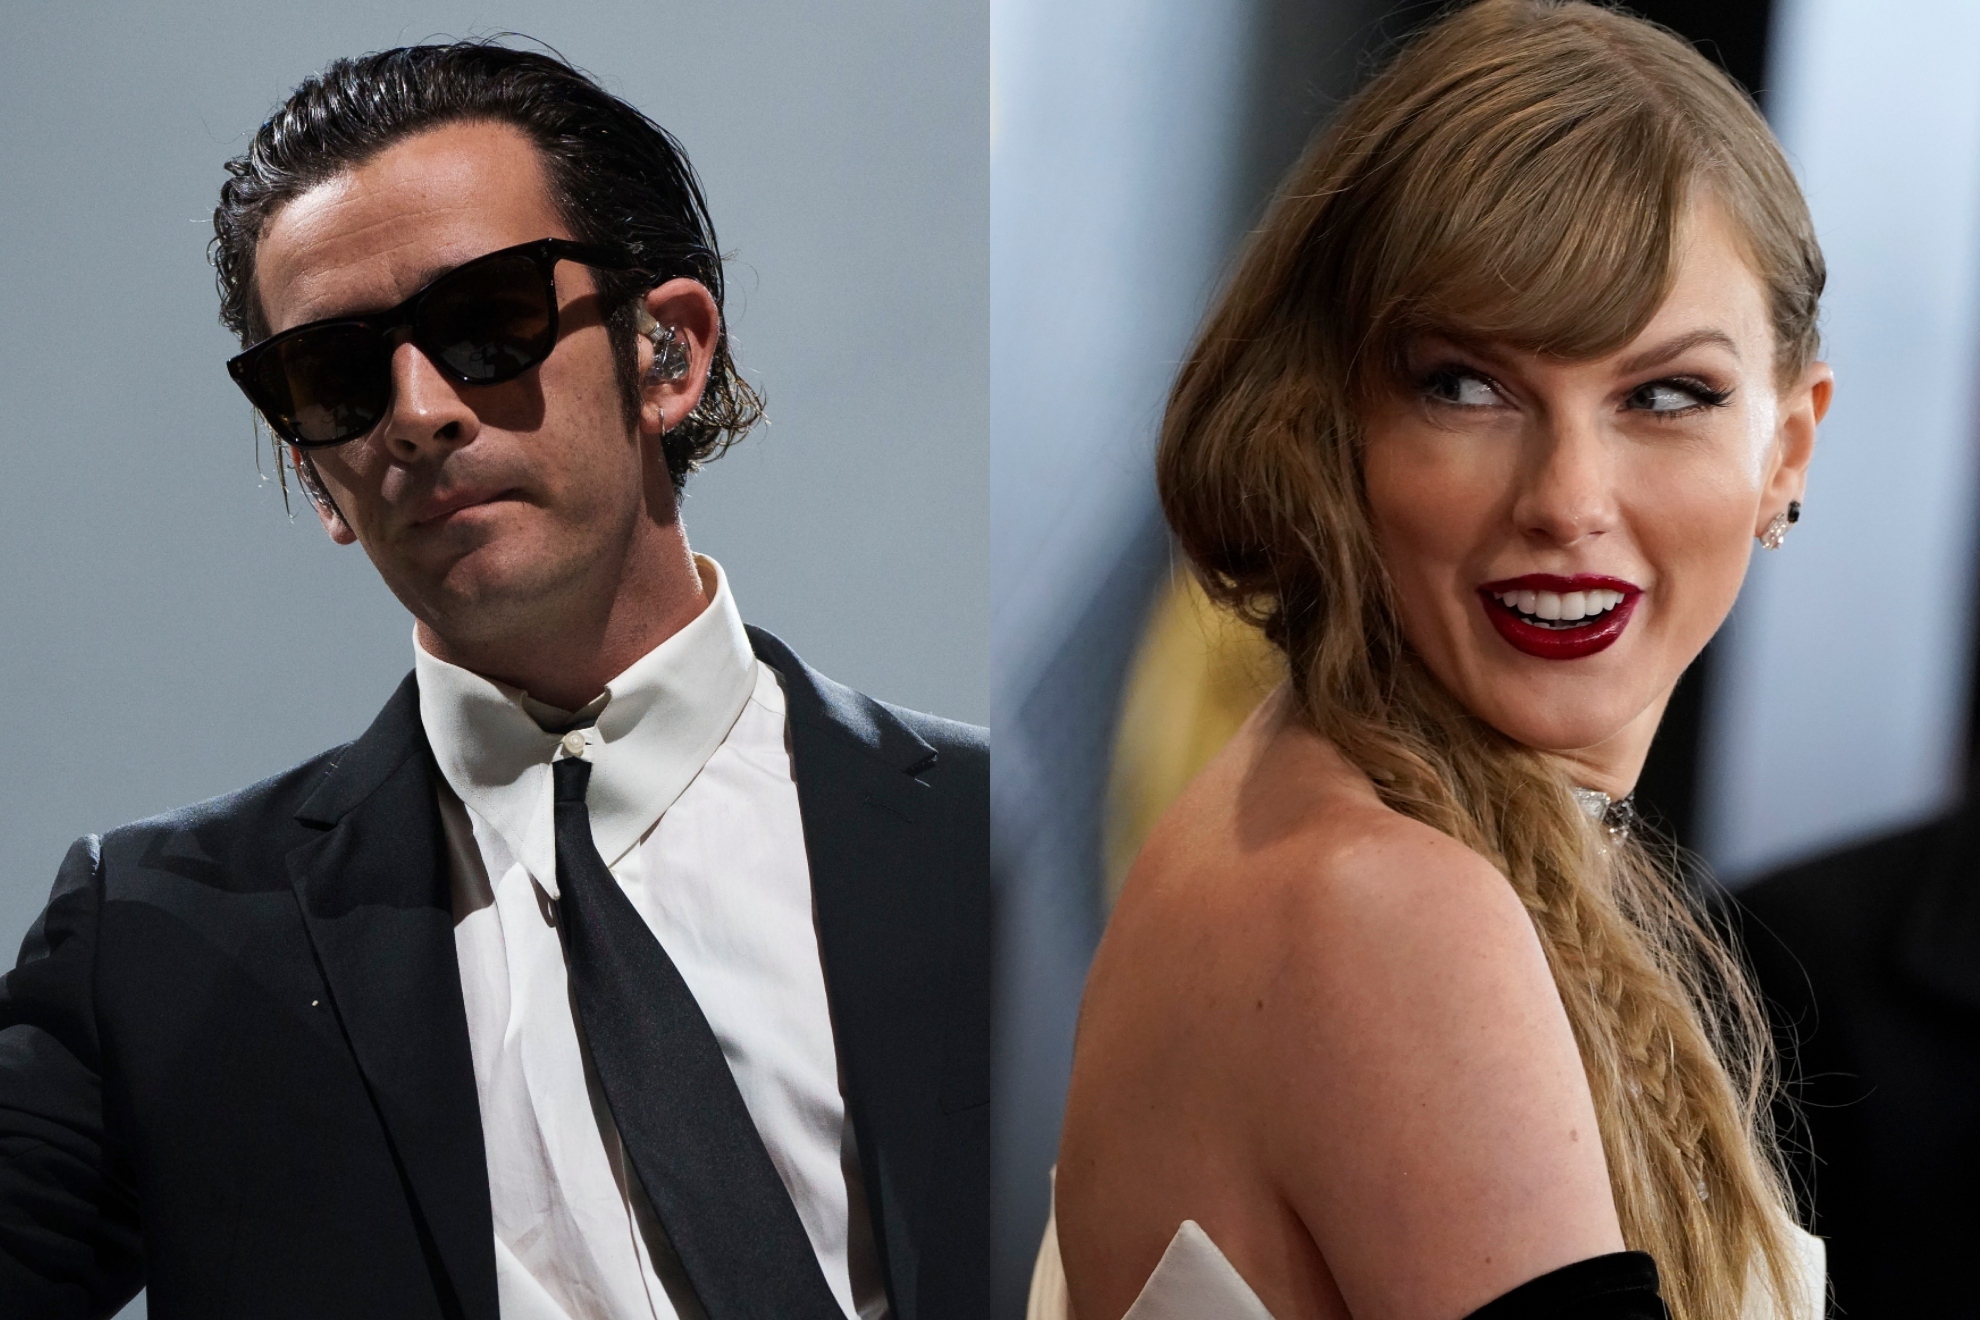 Matty Healys family respond to claims his relationship with Taylor Swift inspired her latest album